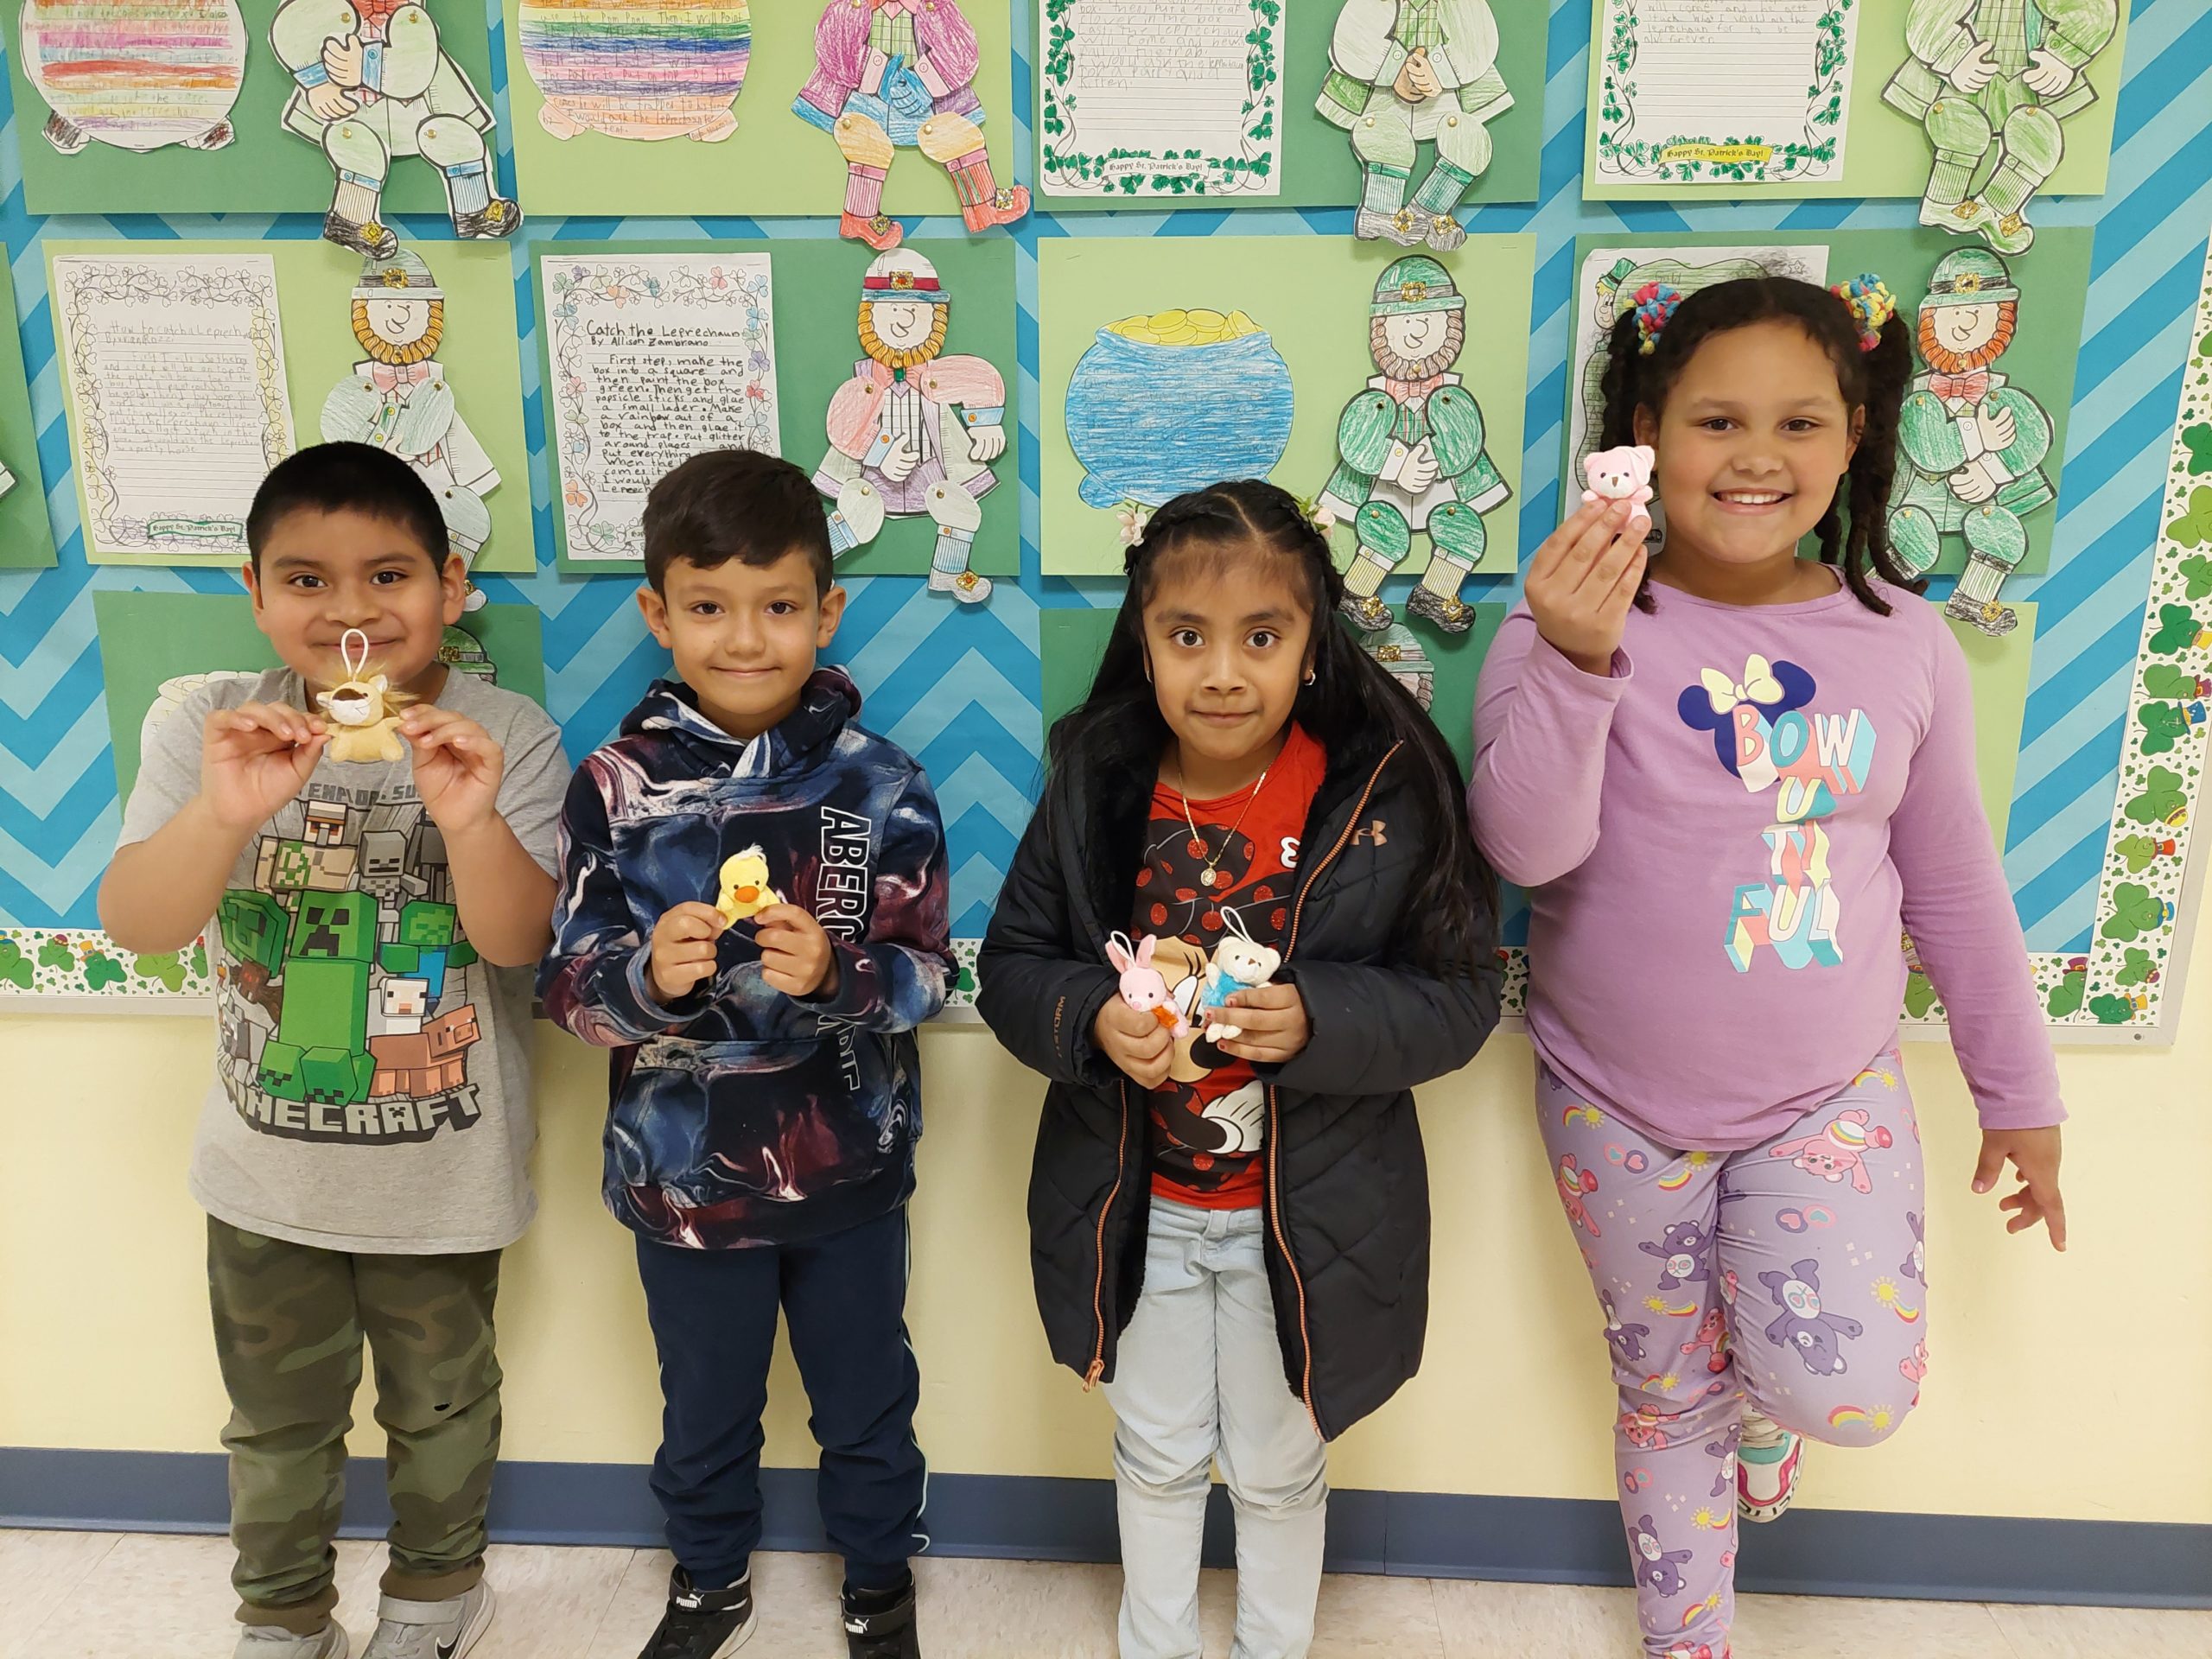 To thank the Southampton Animal Shelter for visiting their classes to talk about its Humane Education Program, Hampton Bays Elementary School second-graders donated $1,206 to the shelter. To raise the funds, the students sold mini stuffed animals during the week of March 7.